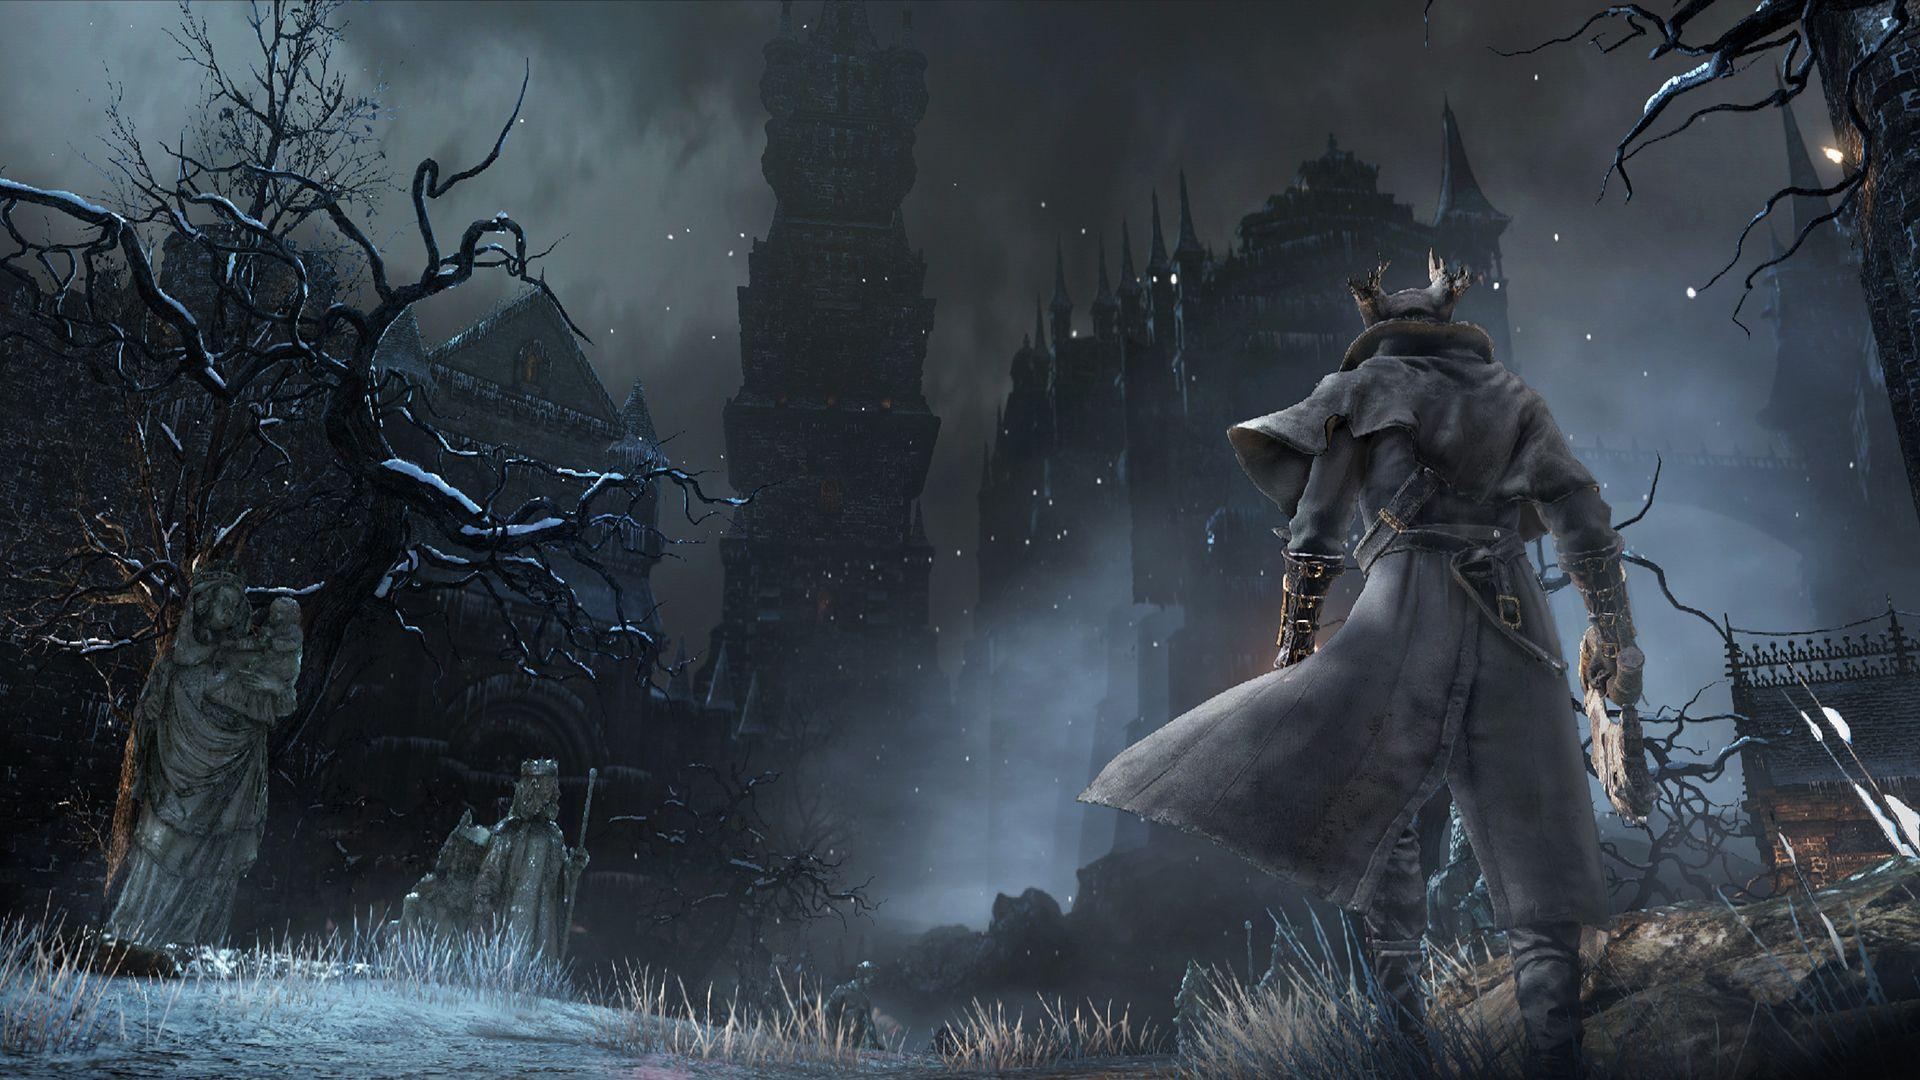 Bloodborne: rumors suggest news to come - Pledge Times